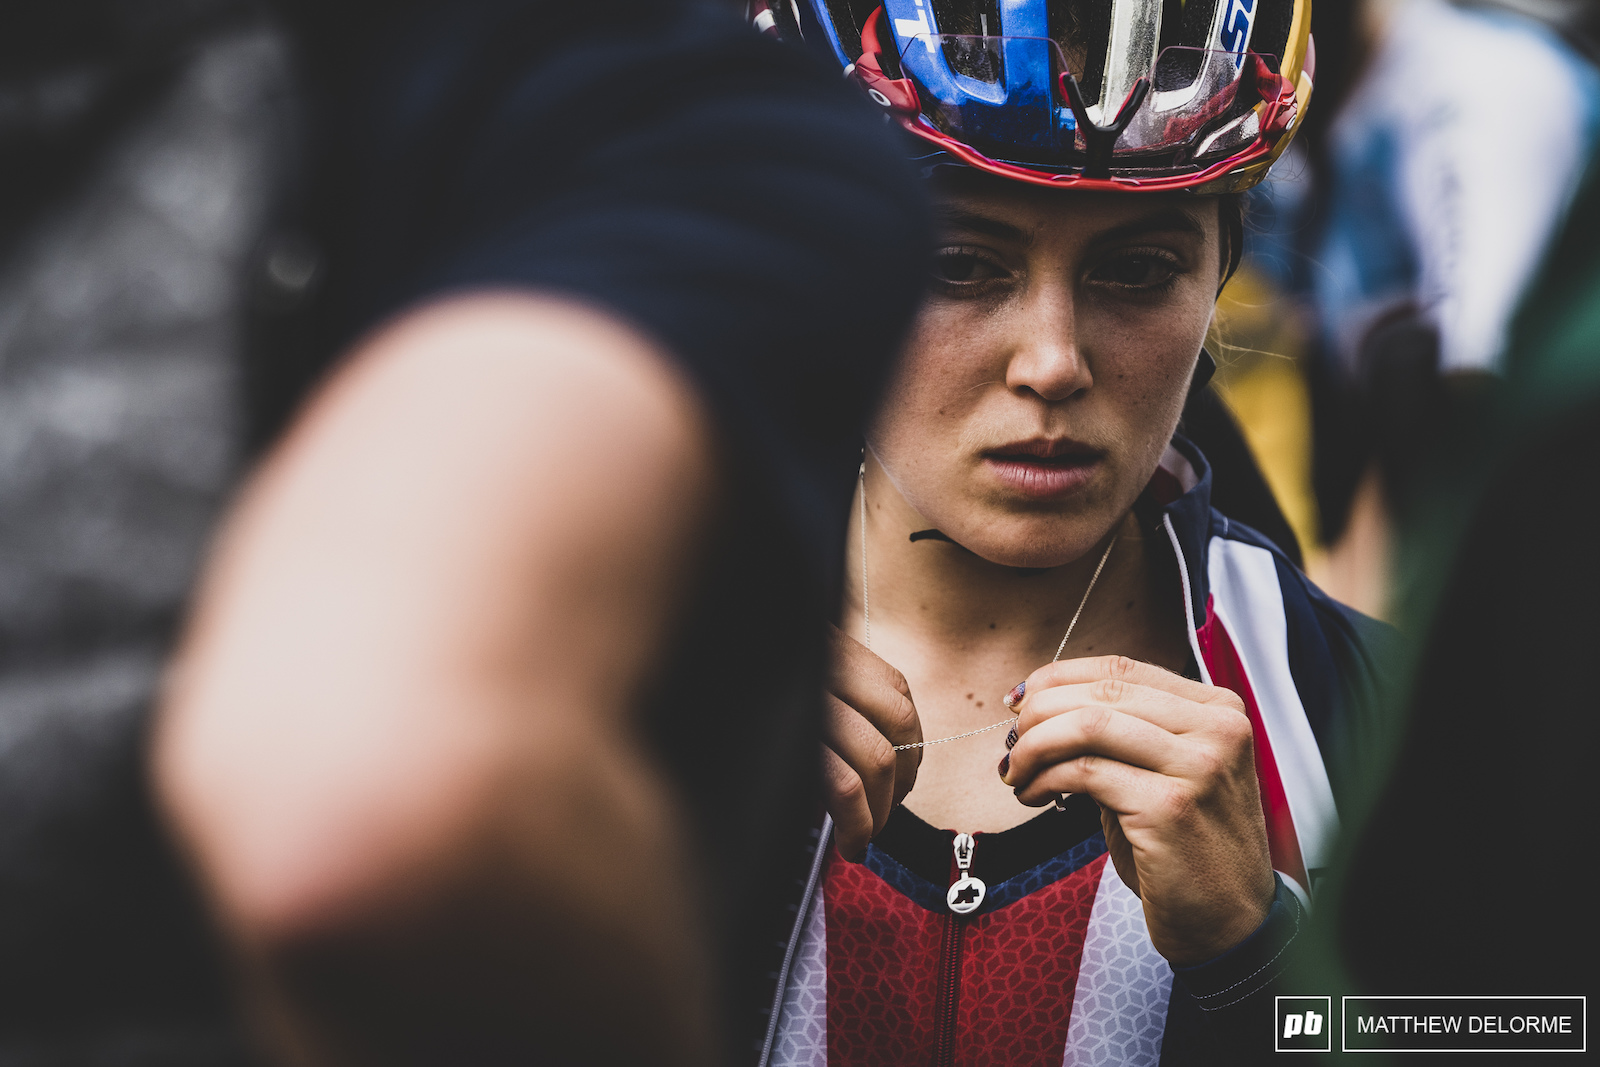 Kate Courtney looked a little pensive before the start.